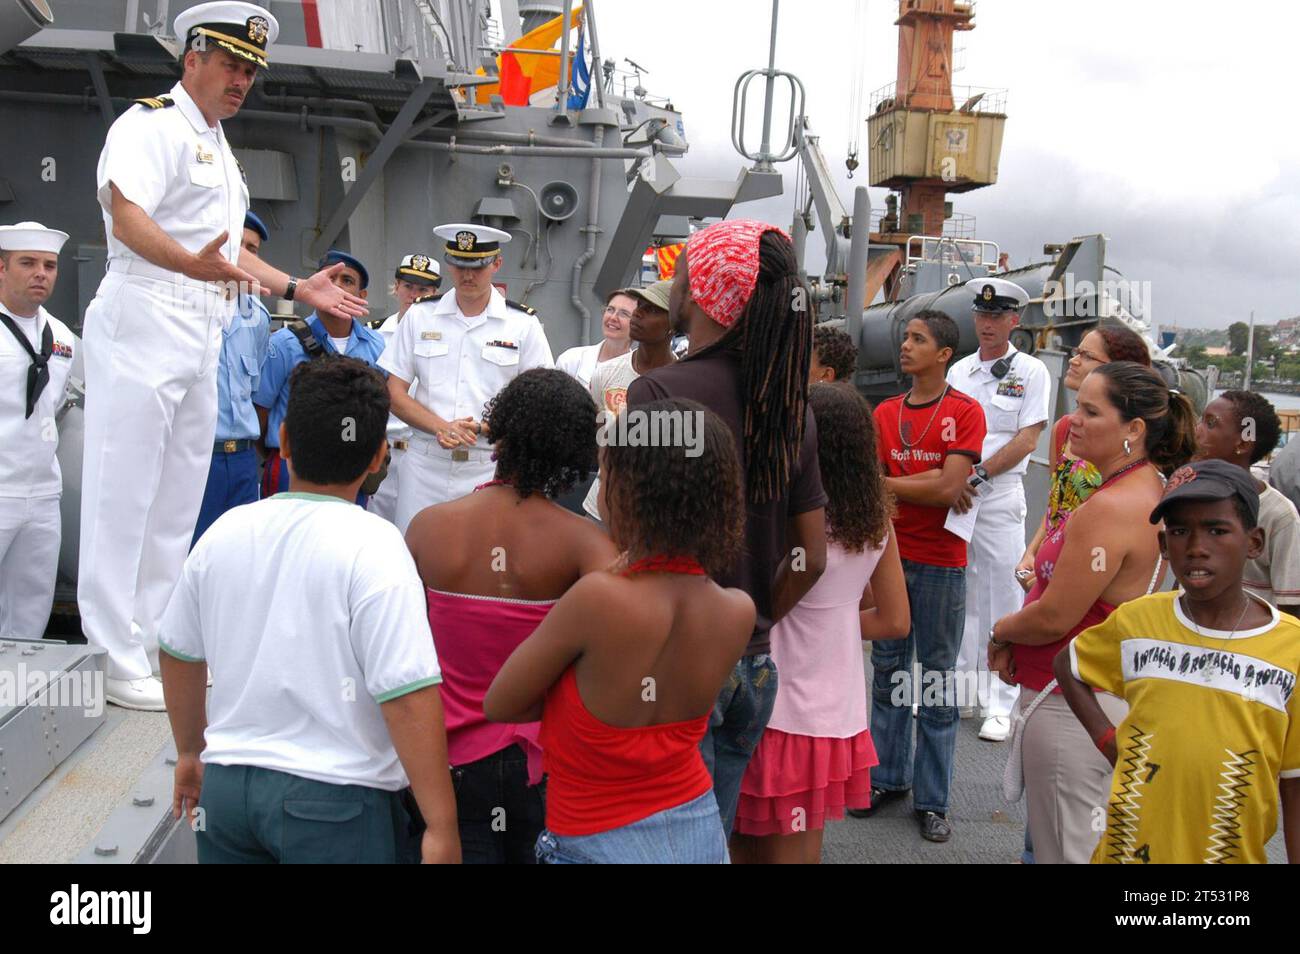 0704208629D-012  SALVADOR, Brazil (April 20, 2007) - Cmdr. Bill McKinley, commanding officer of USS Mitscher (DDG 57), speaks to a tour group from Baguncaco, an organization that assists disadvantaged youth, during Partnership of the Americas (POA) 2007. POA is designed to strengthen cooperative partnerships throughout the region with events at sea and ashore. U.S. Navy Stock Photo